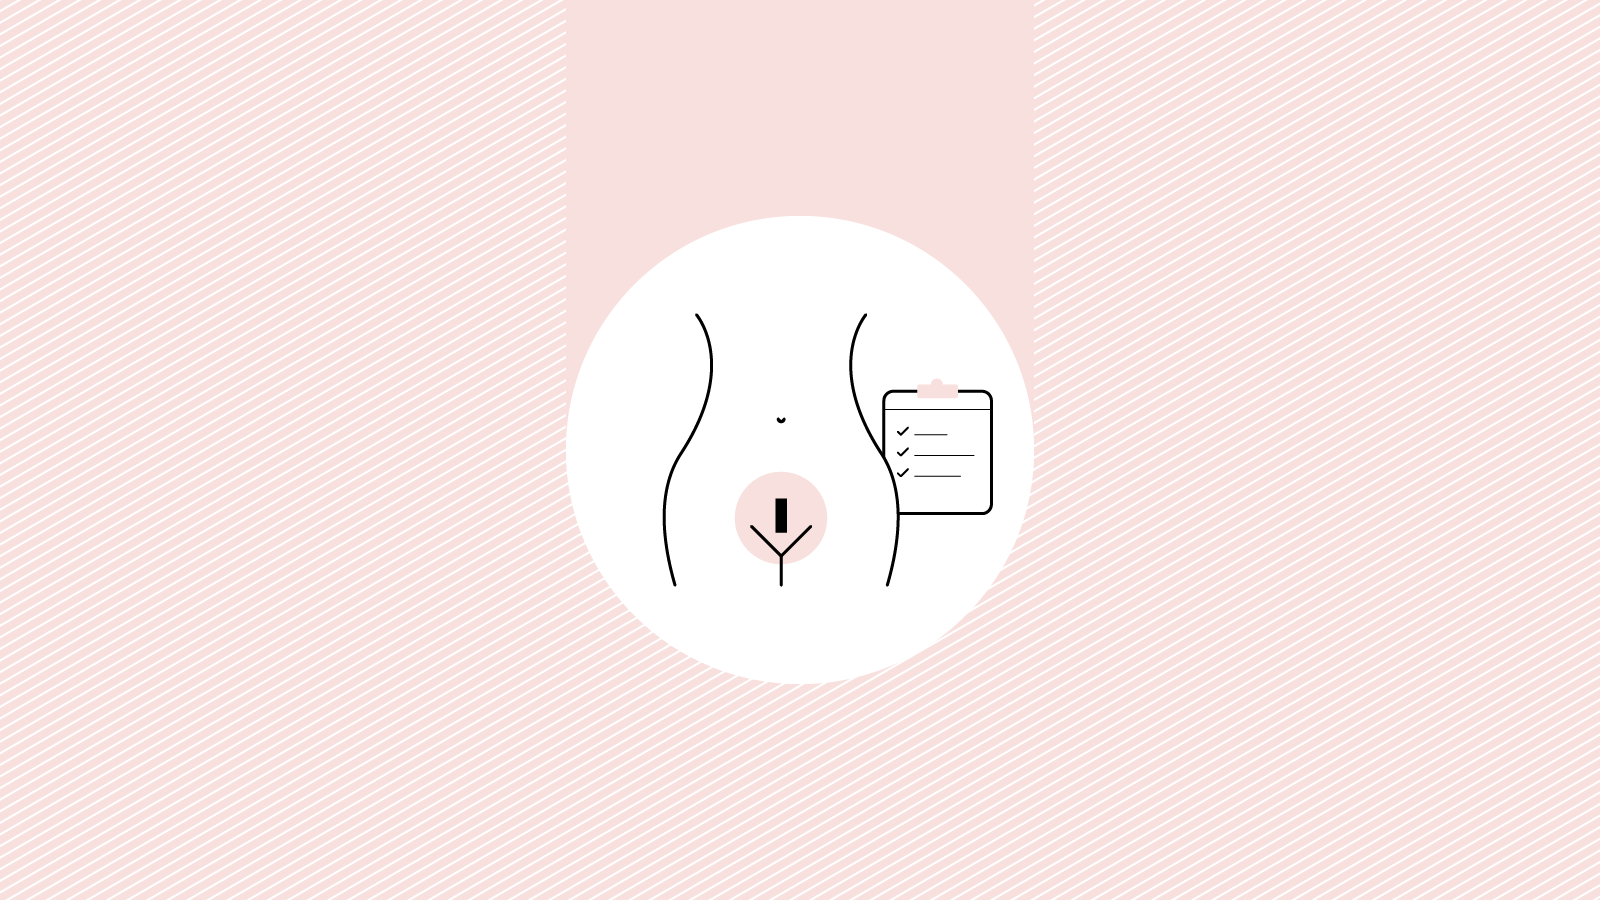 How Does Laser Hair Removal Work On The Bikini Line?